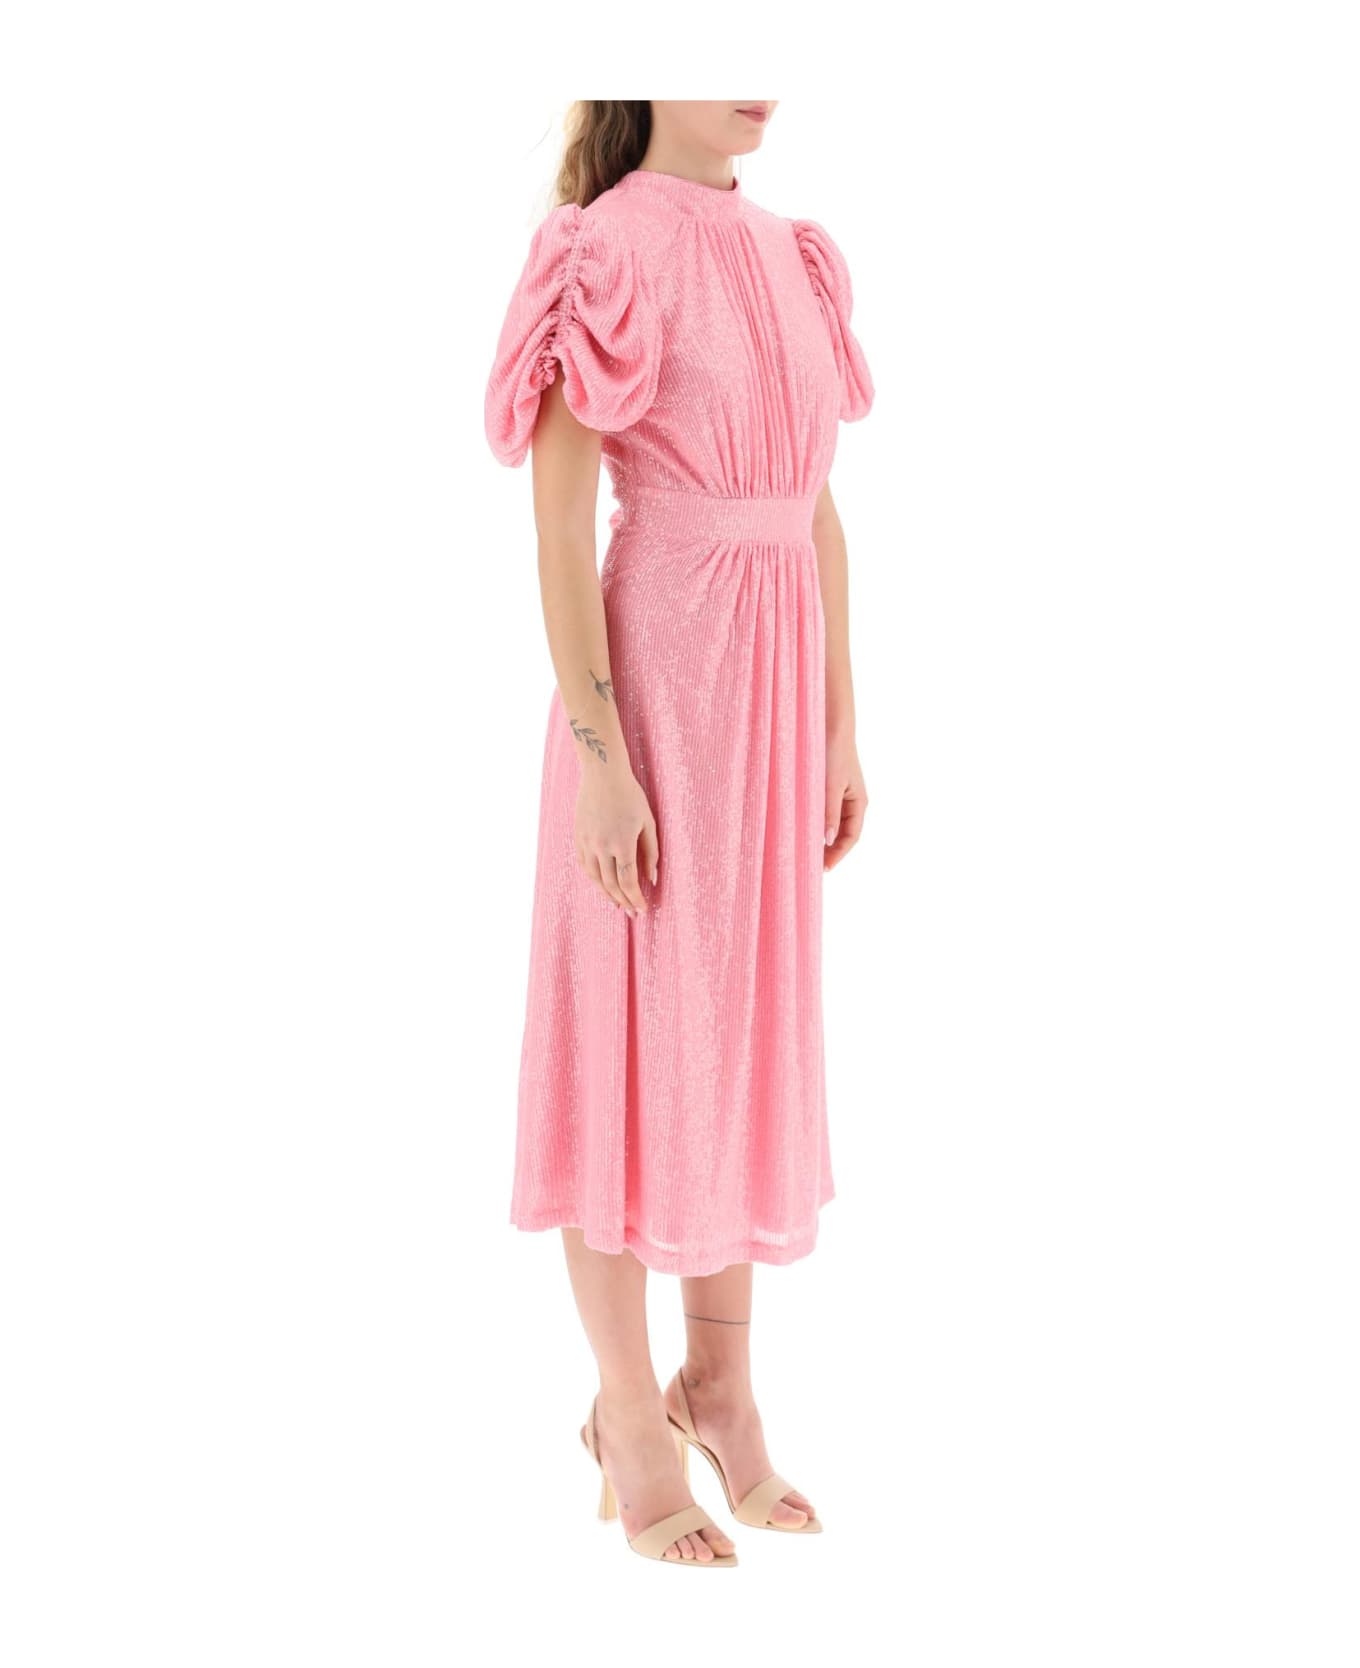 Rotate by Birger Christensen 'noon' Puff Sleeve Sequined Dress - BEGONIA PINK (Pink)